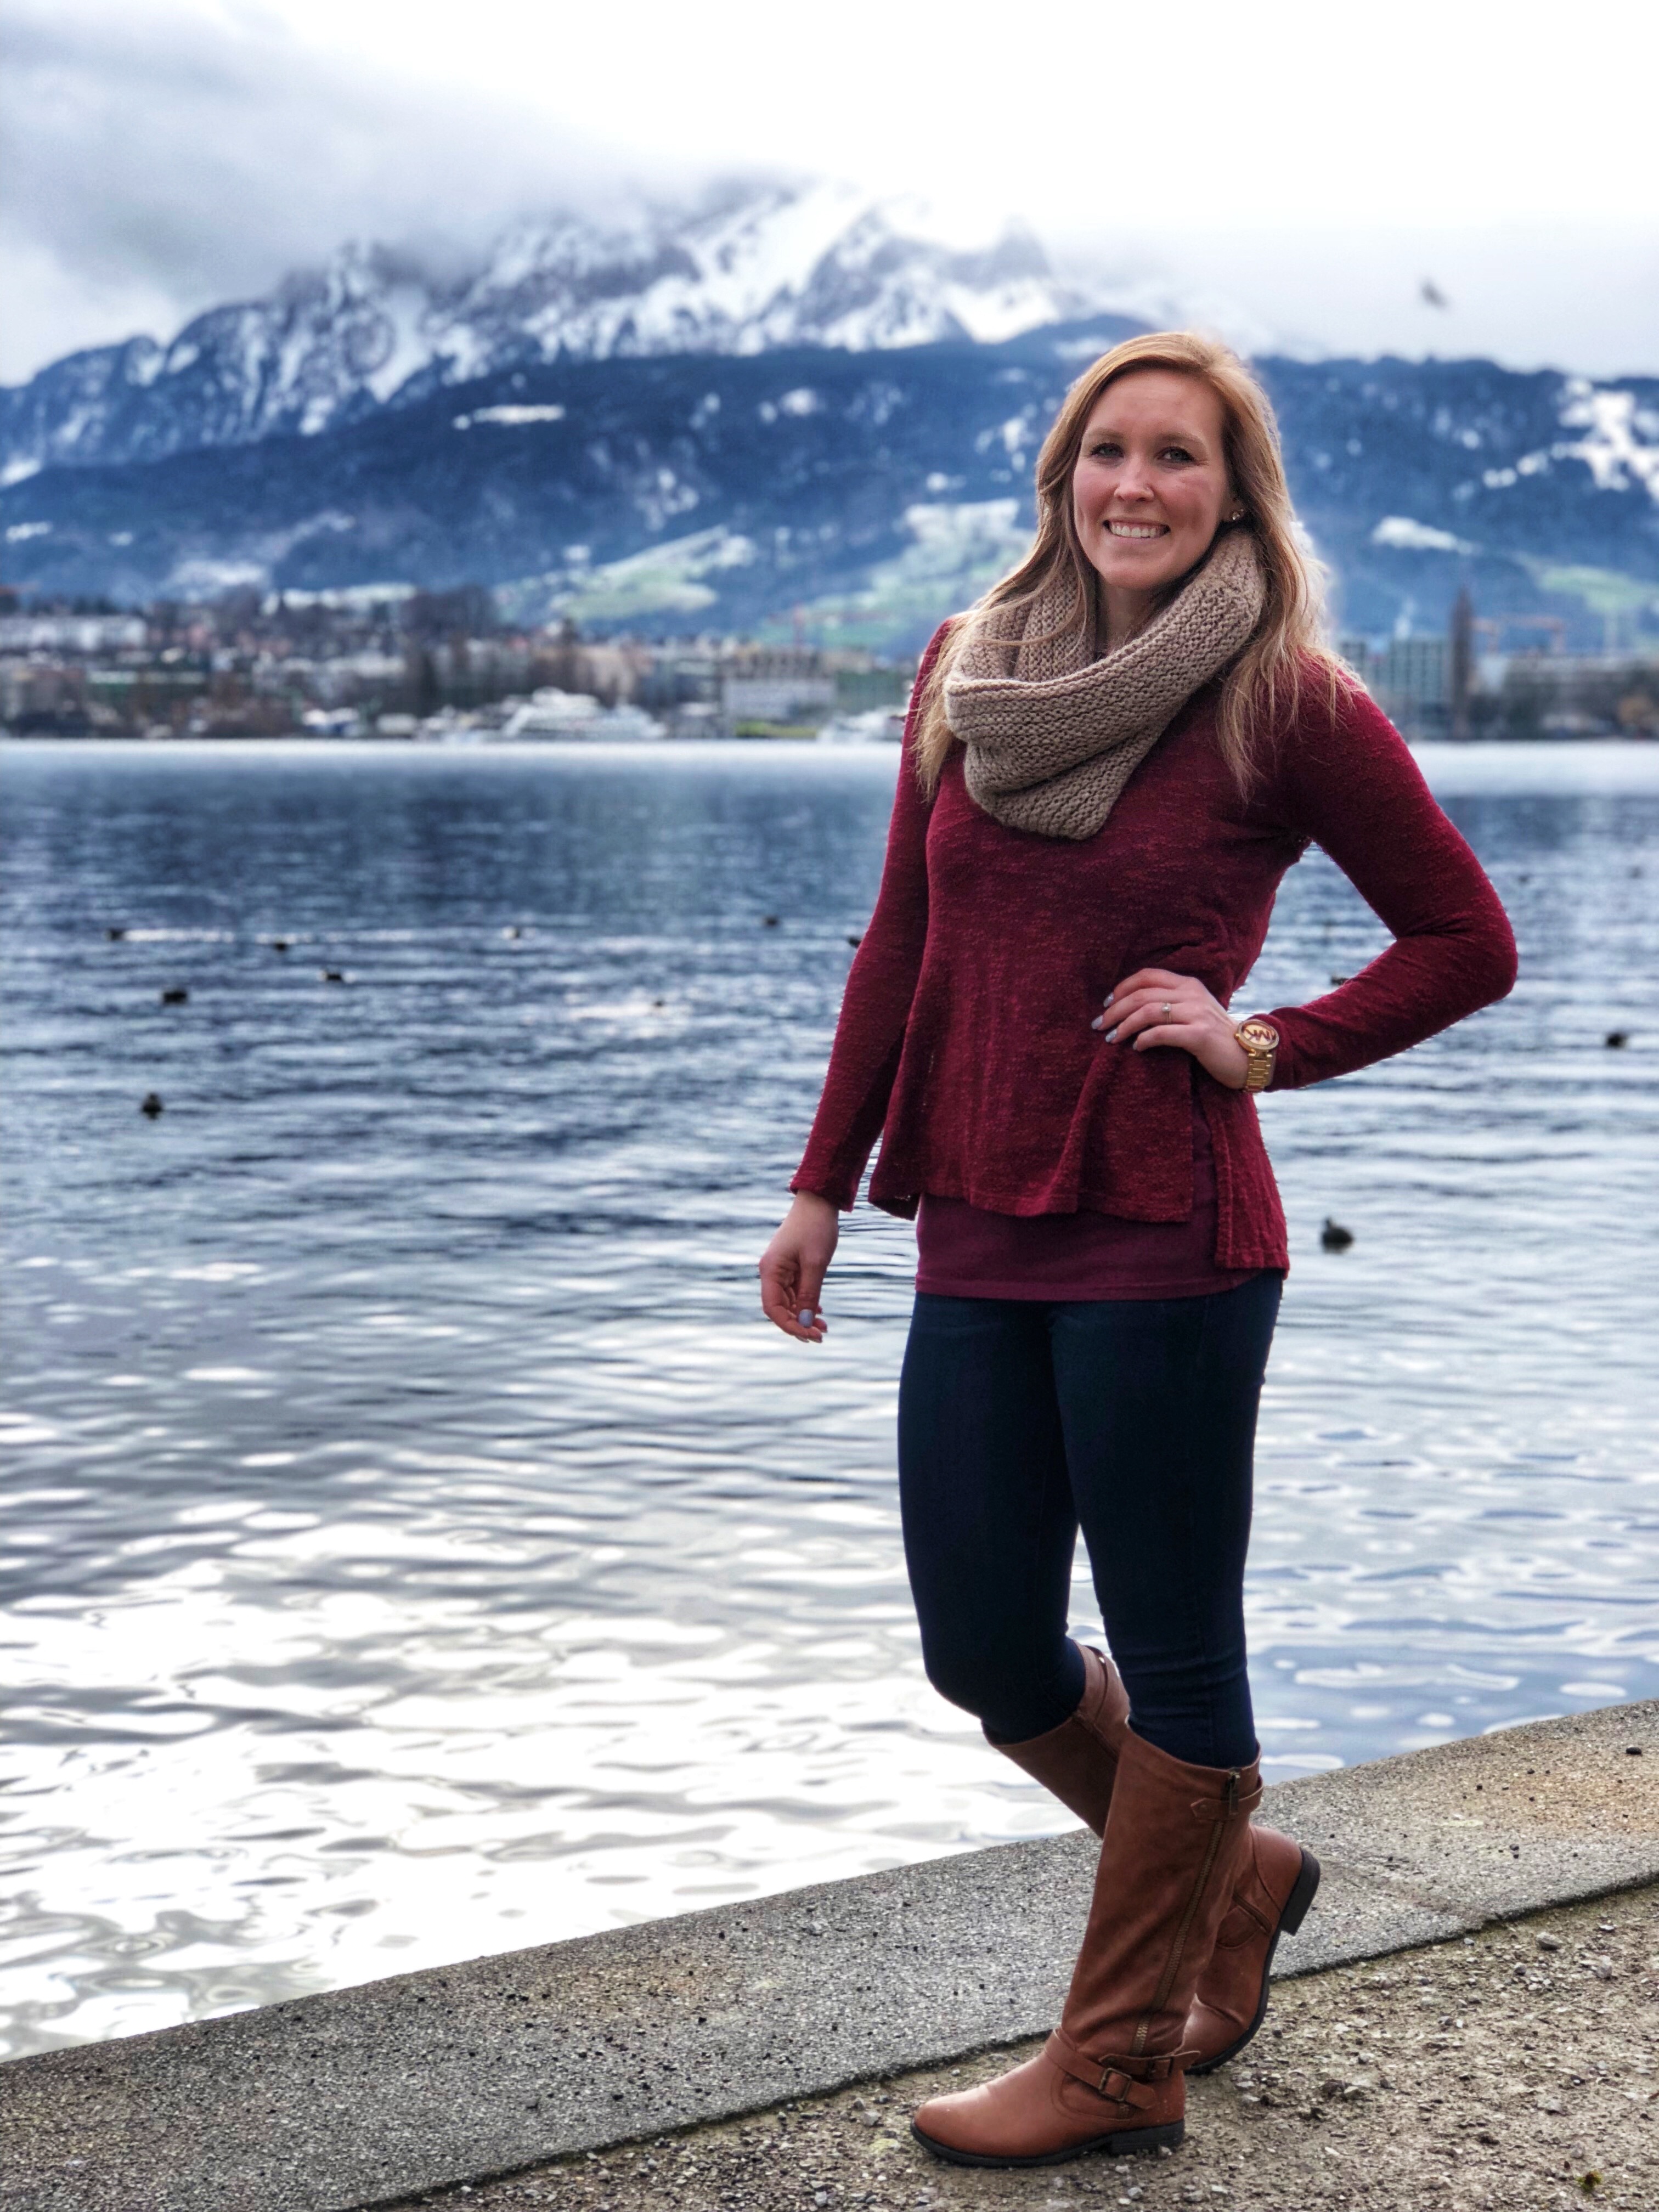 Erinn standing in front of Lake Lucerne with the snowcapped Alps in the background.